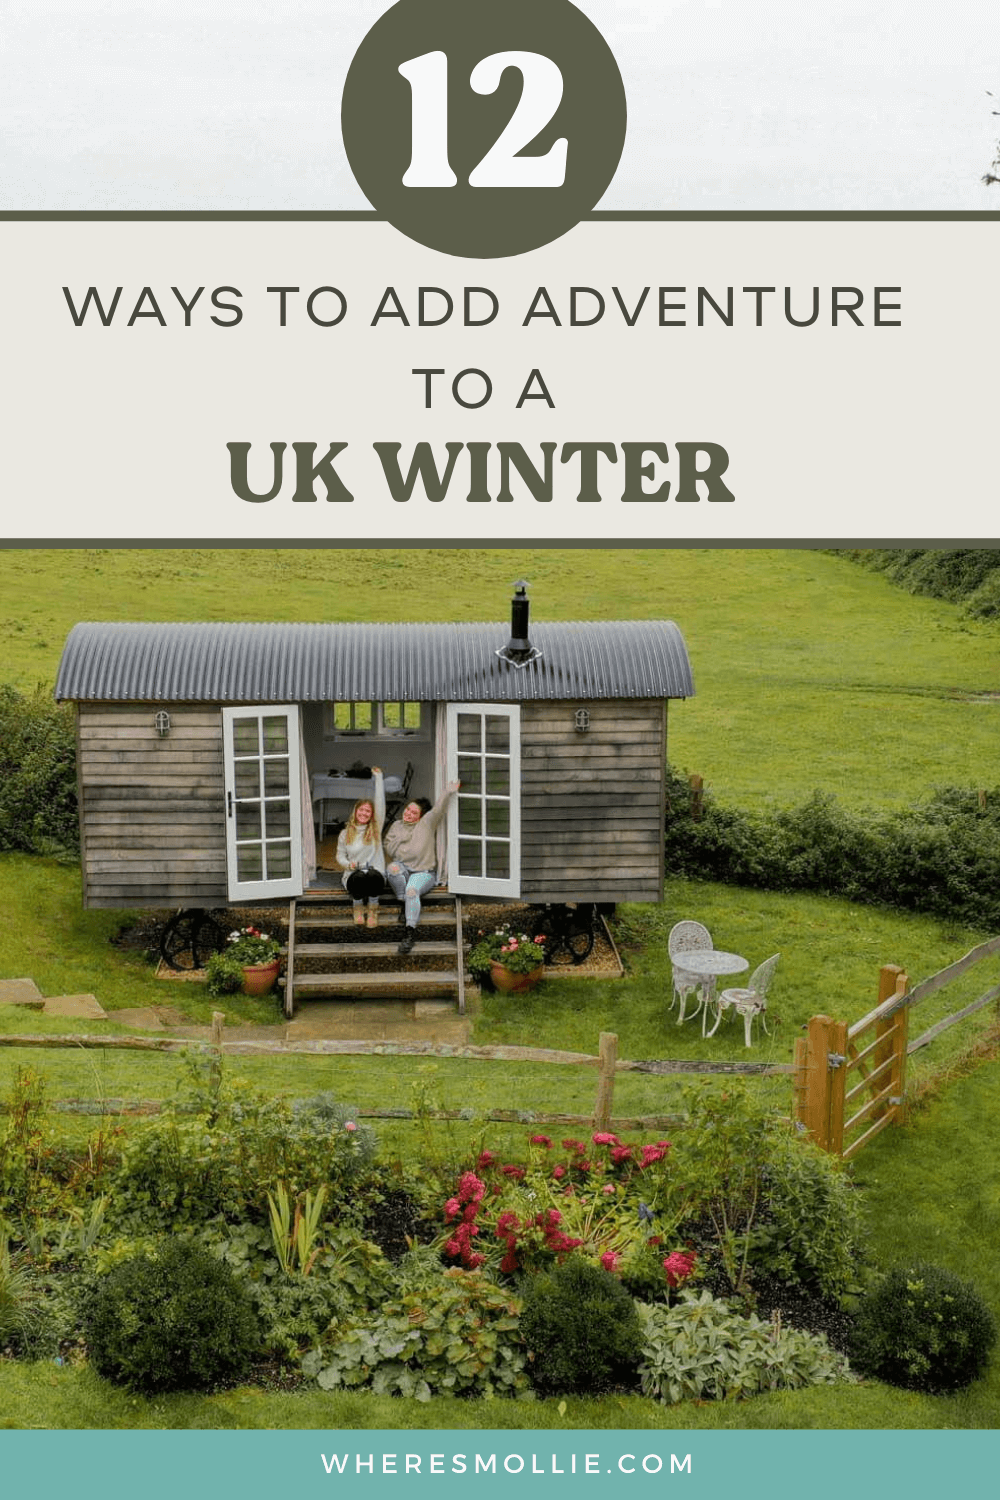 12 ways to add adventure to your UK winter